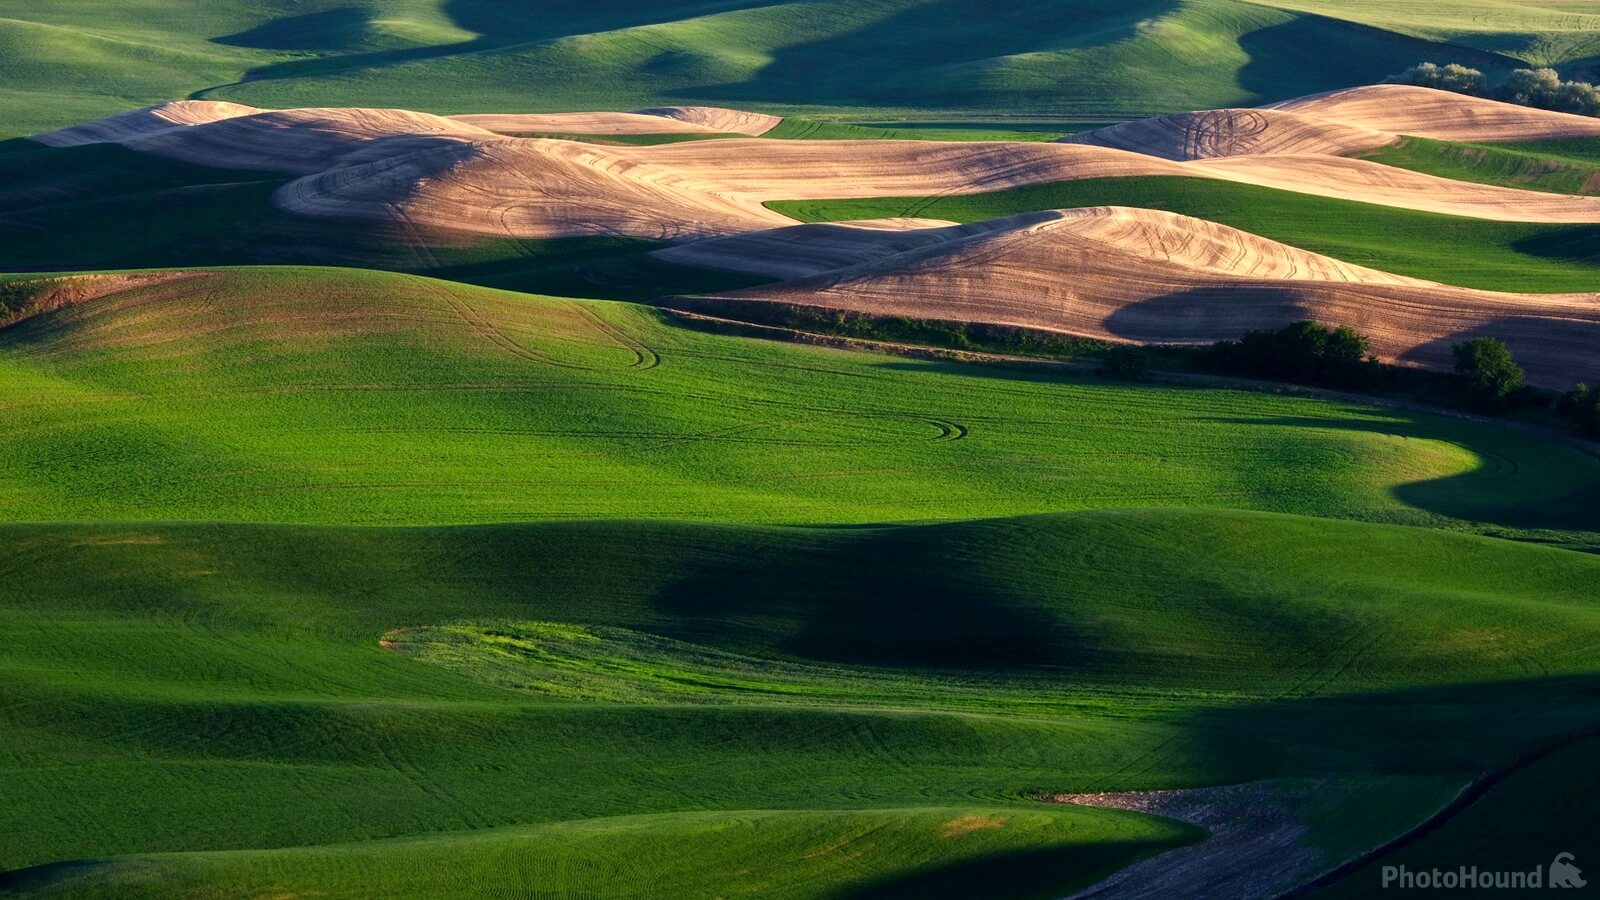 Image of West Steptoe Butte Viewpoint by John Cop